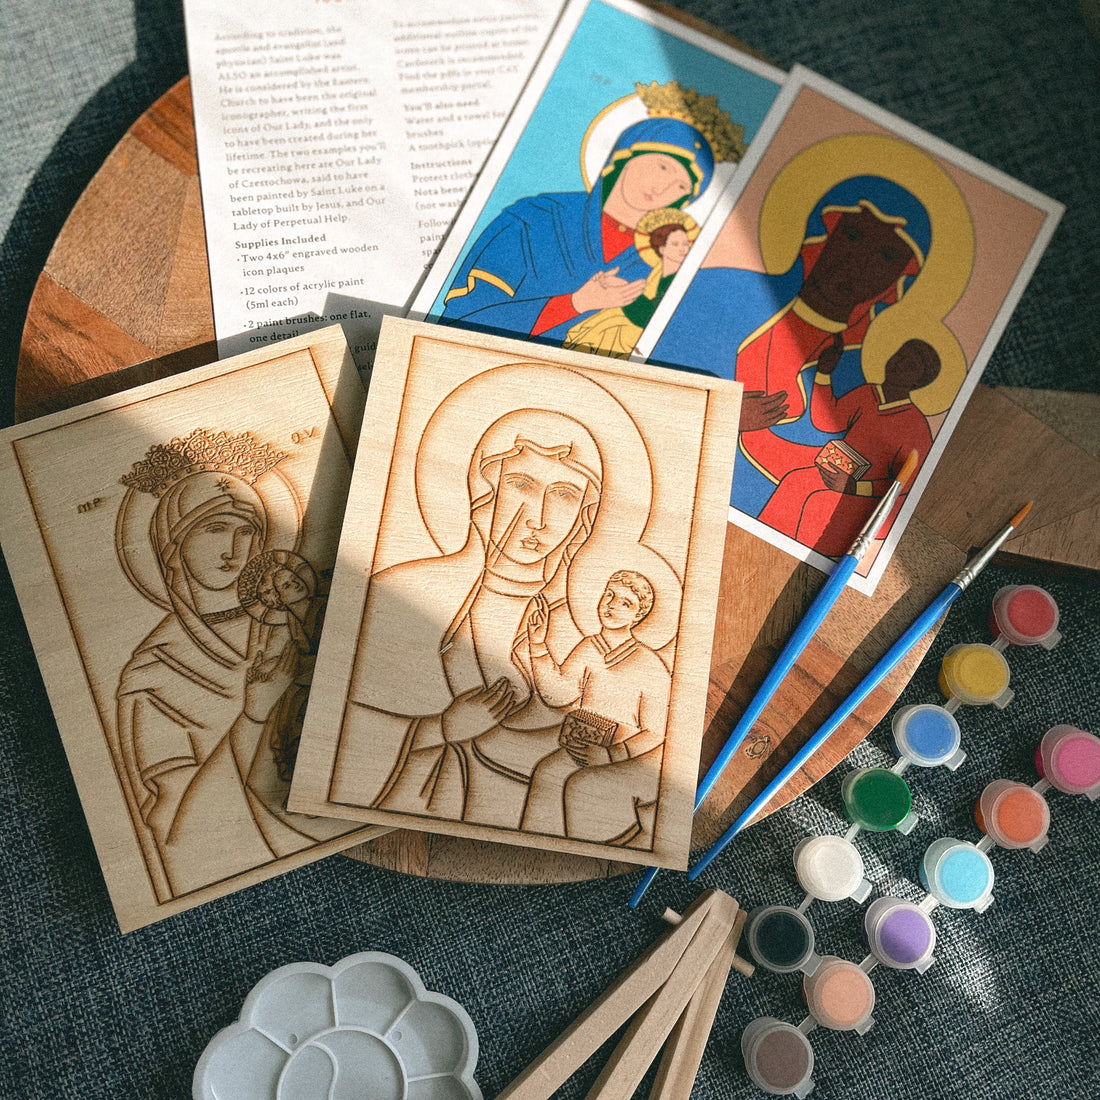 Wooden Plaque Painting Kit with Acrylic Paints and Paint Brushes